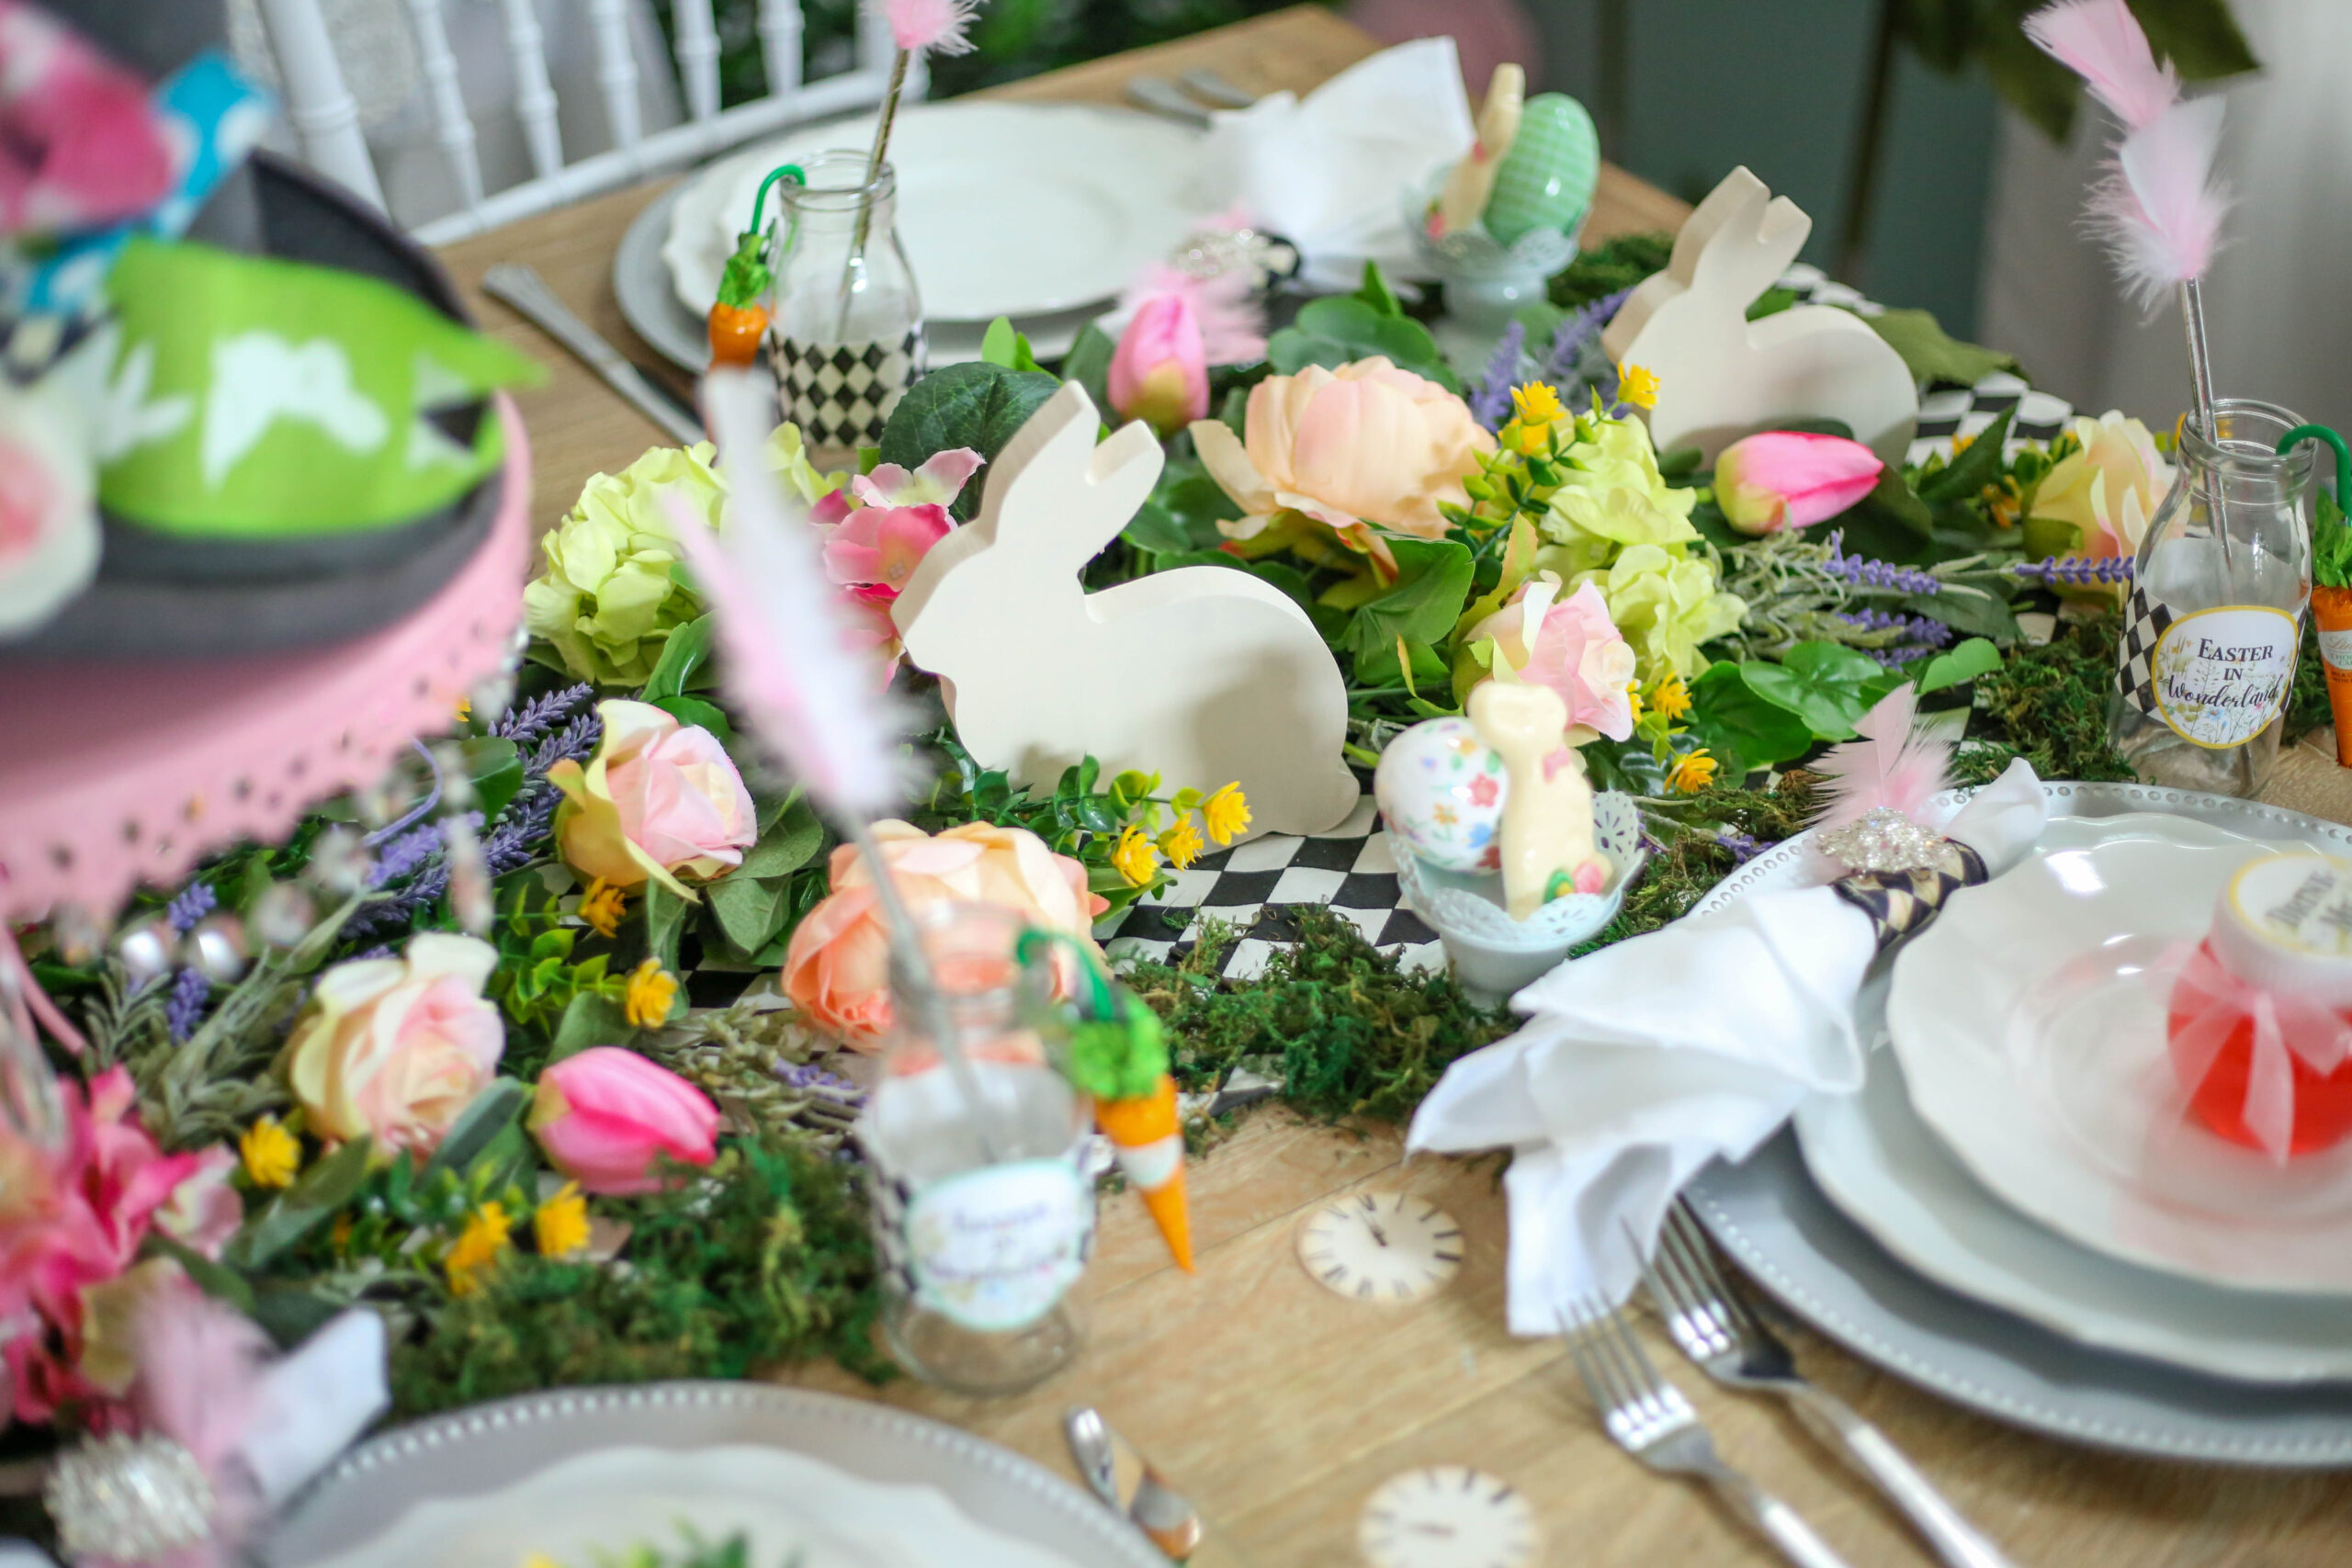 wood cut bunnies in a floral tablescape for easter